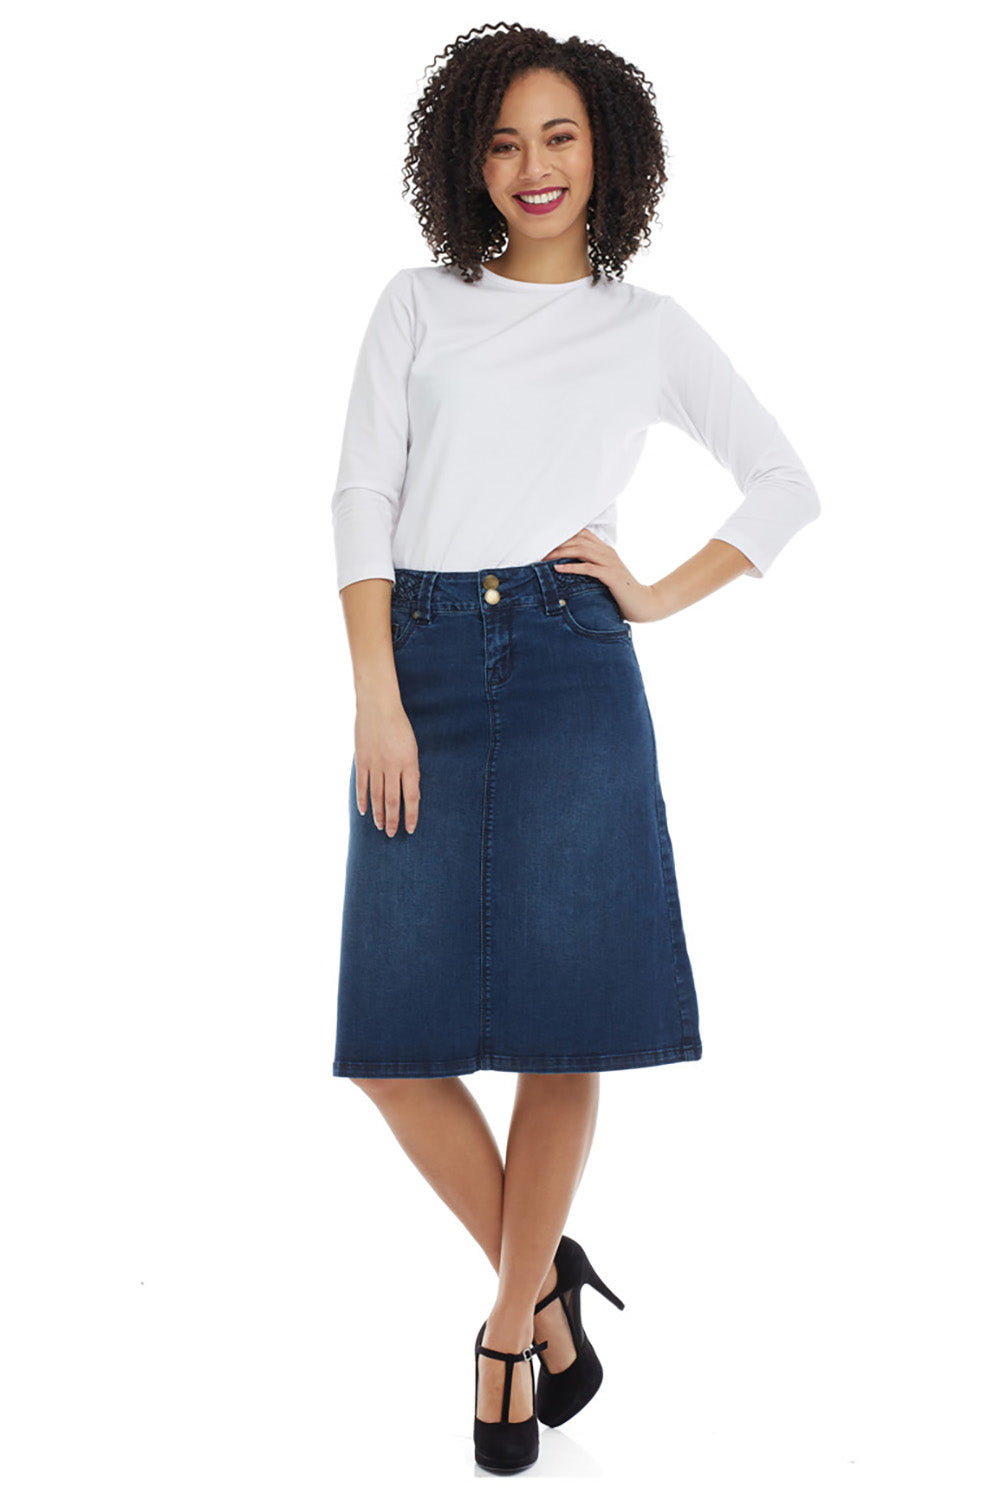 below the knee blue classic 5 pocket A-line denim jean skirt with woven braided belt